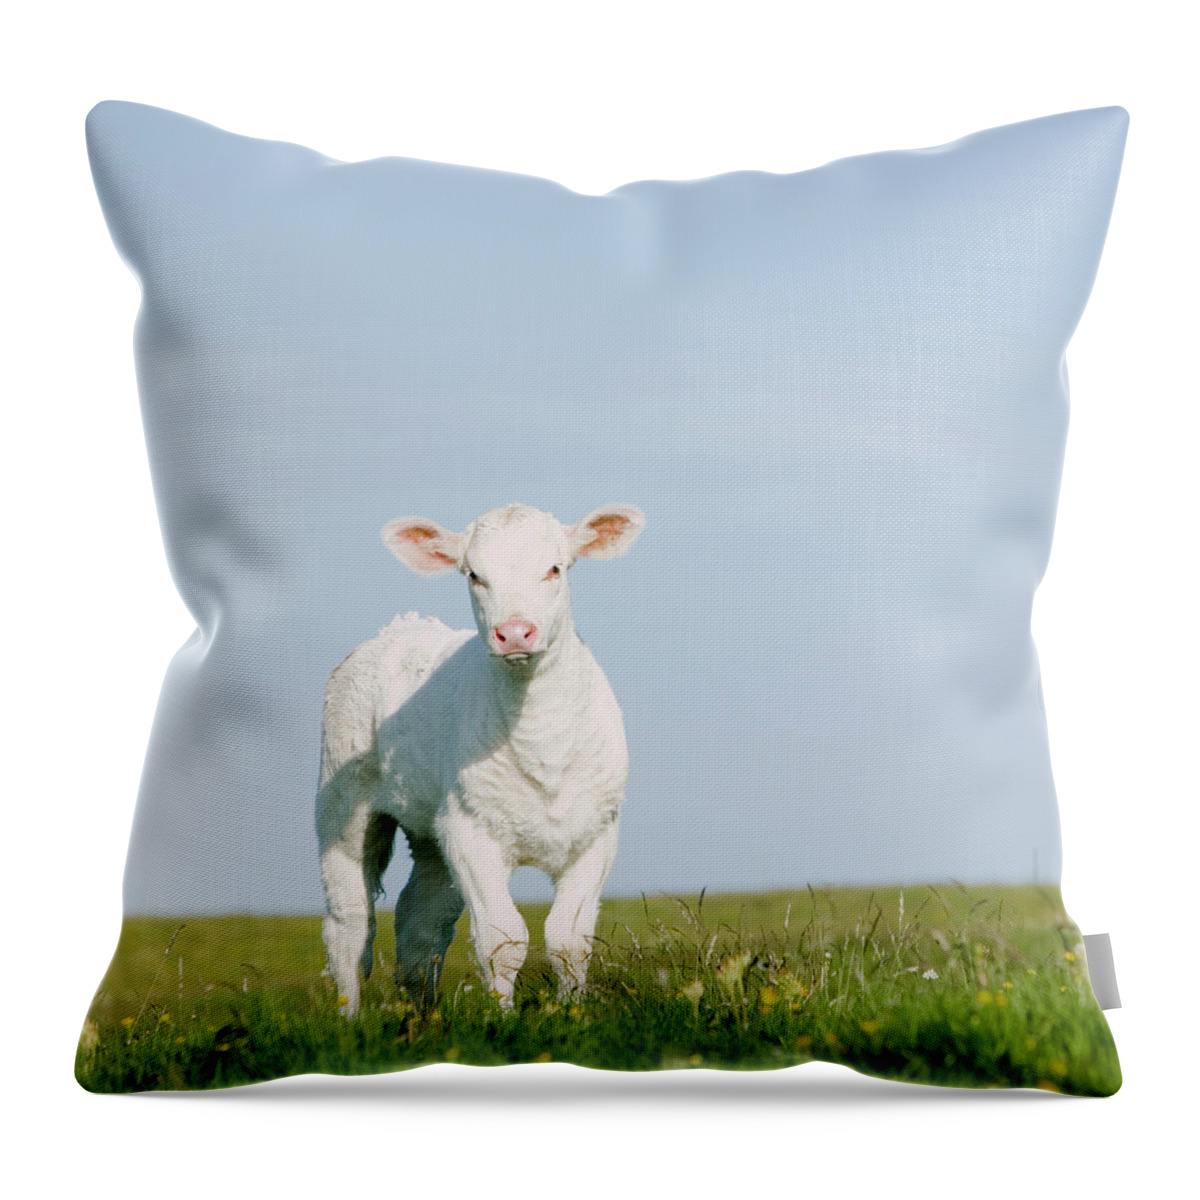 Grass Throw Pillow featuring the photograph Calf Standing On Grass by Roine Magnusson